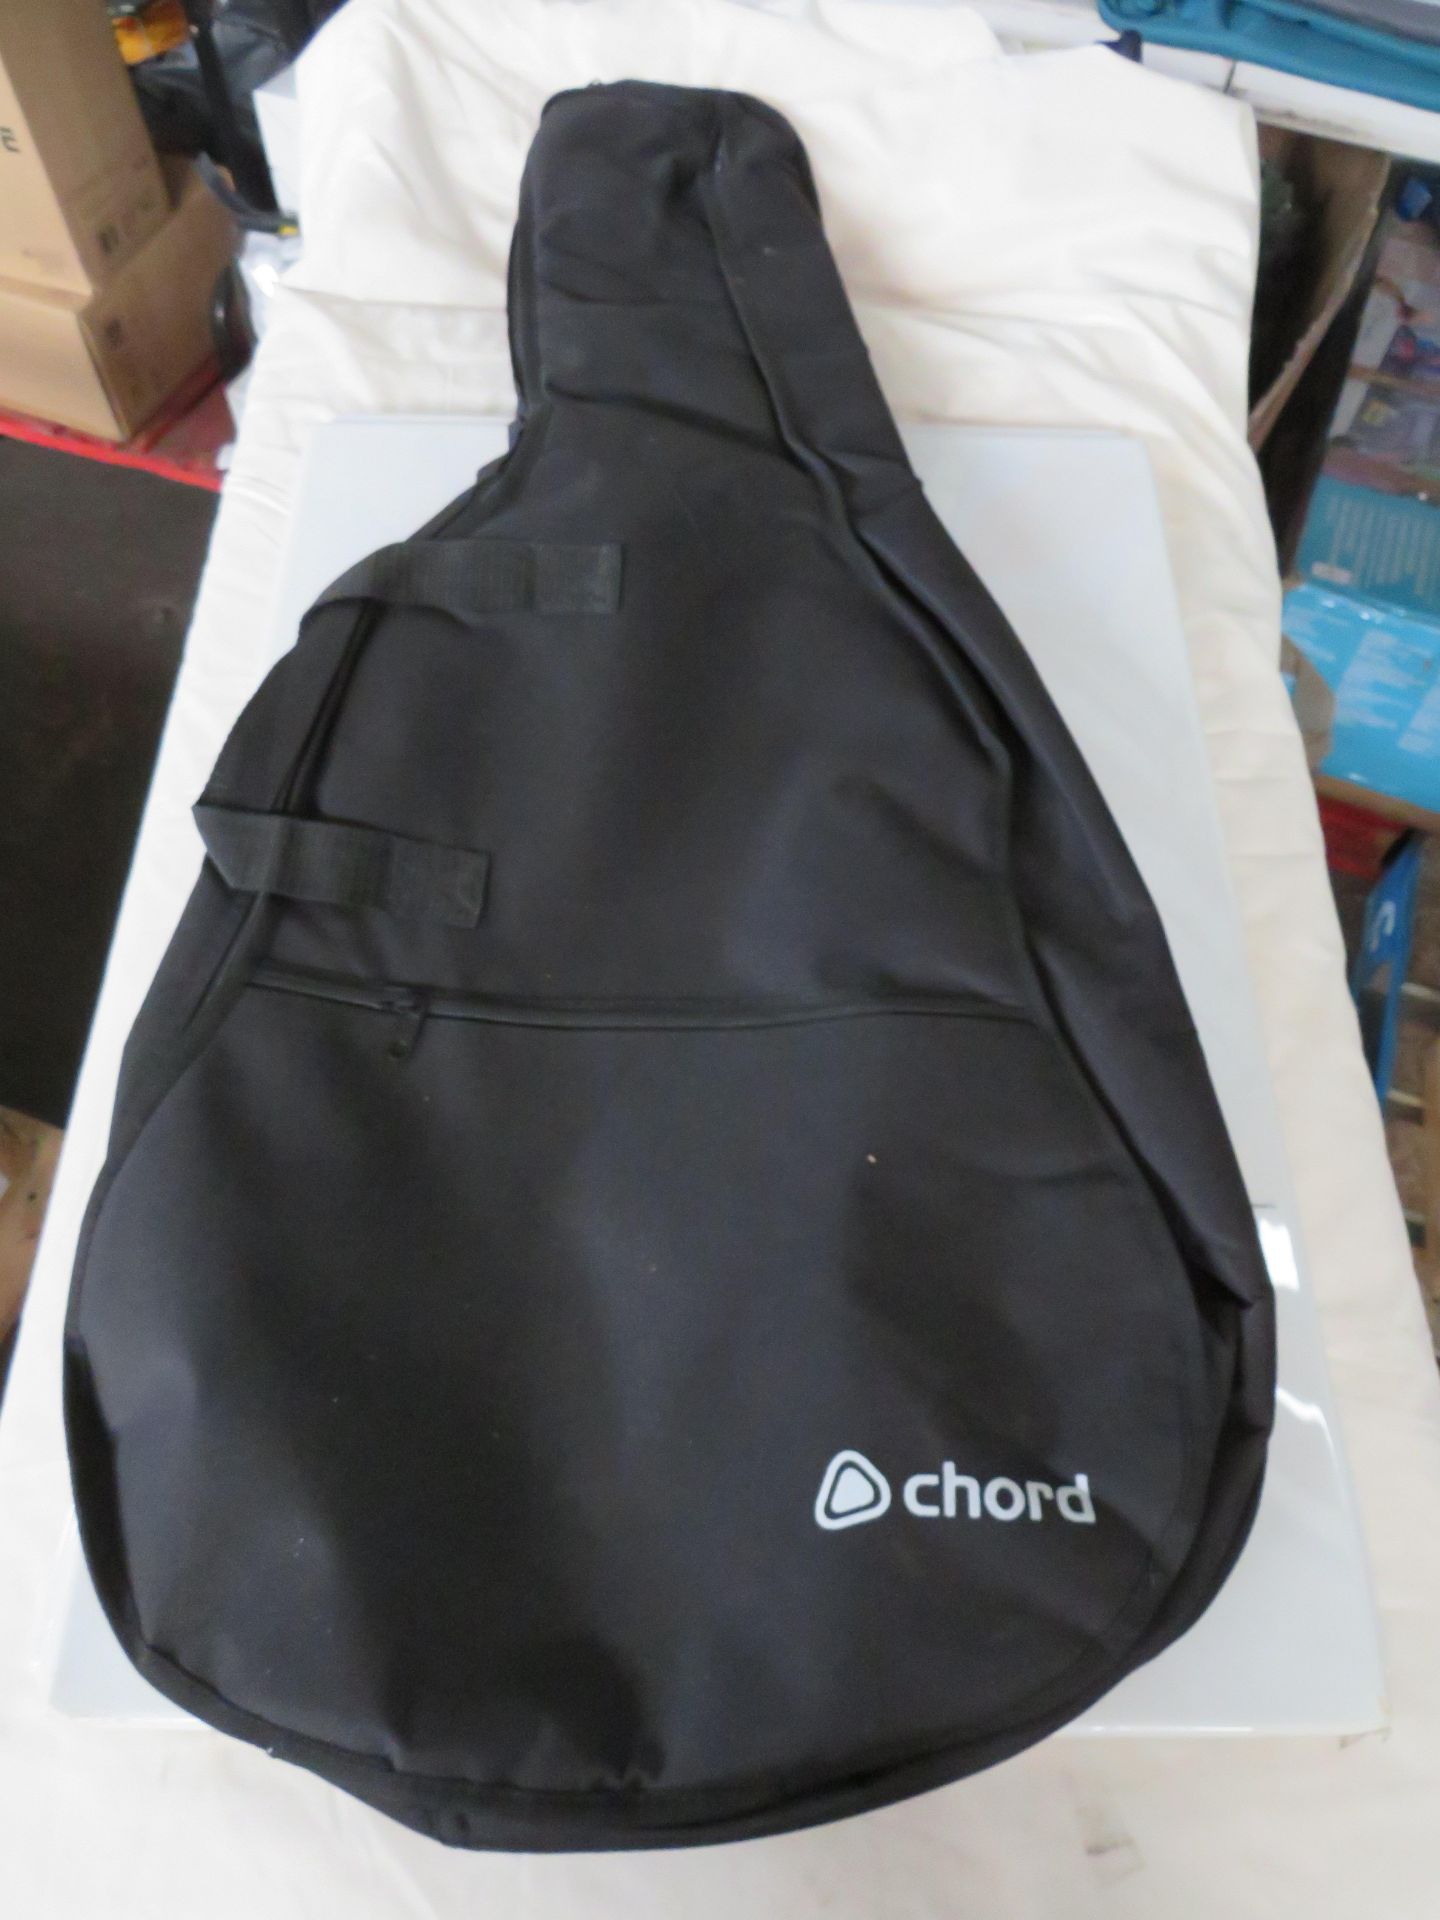 2x Chord - Guitar Case's - New Condition With Packaging.